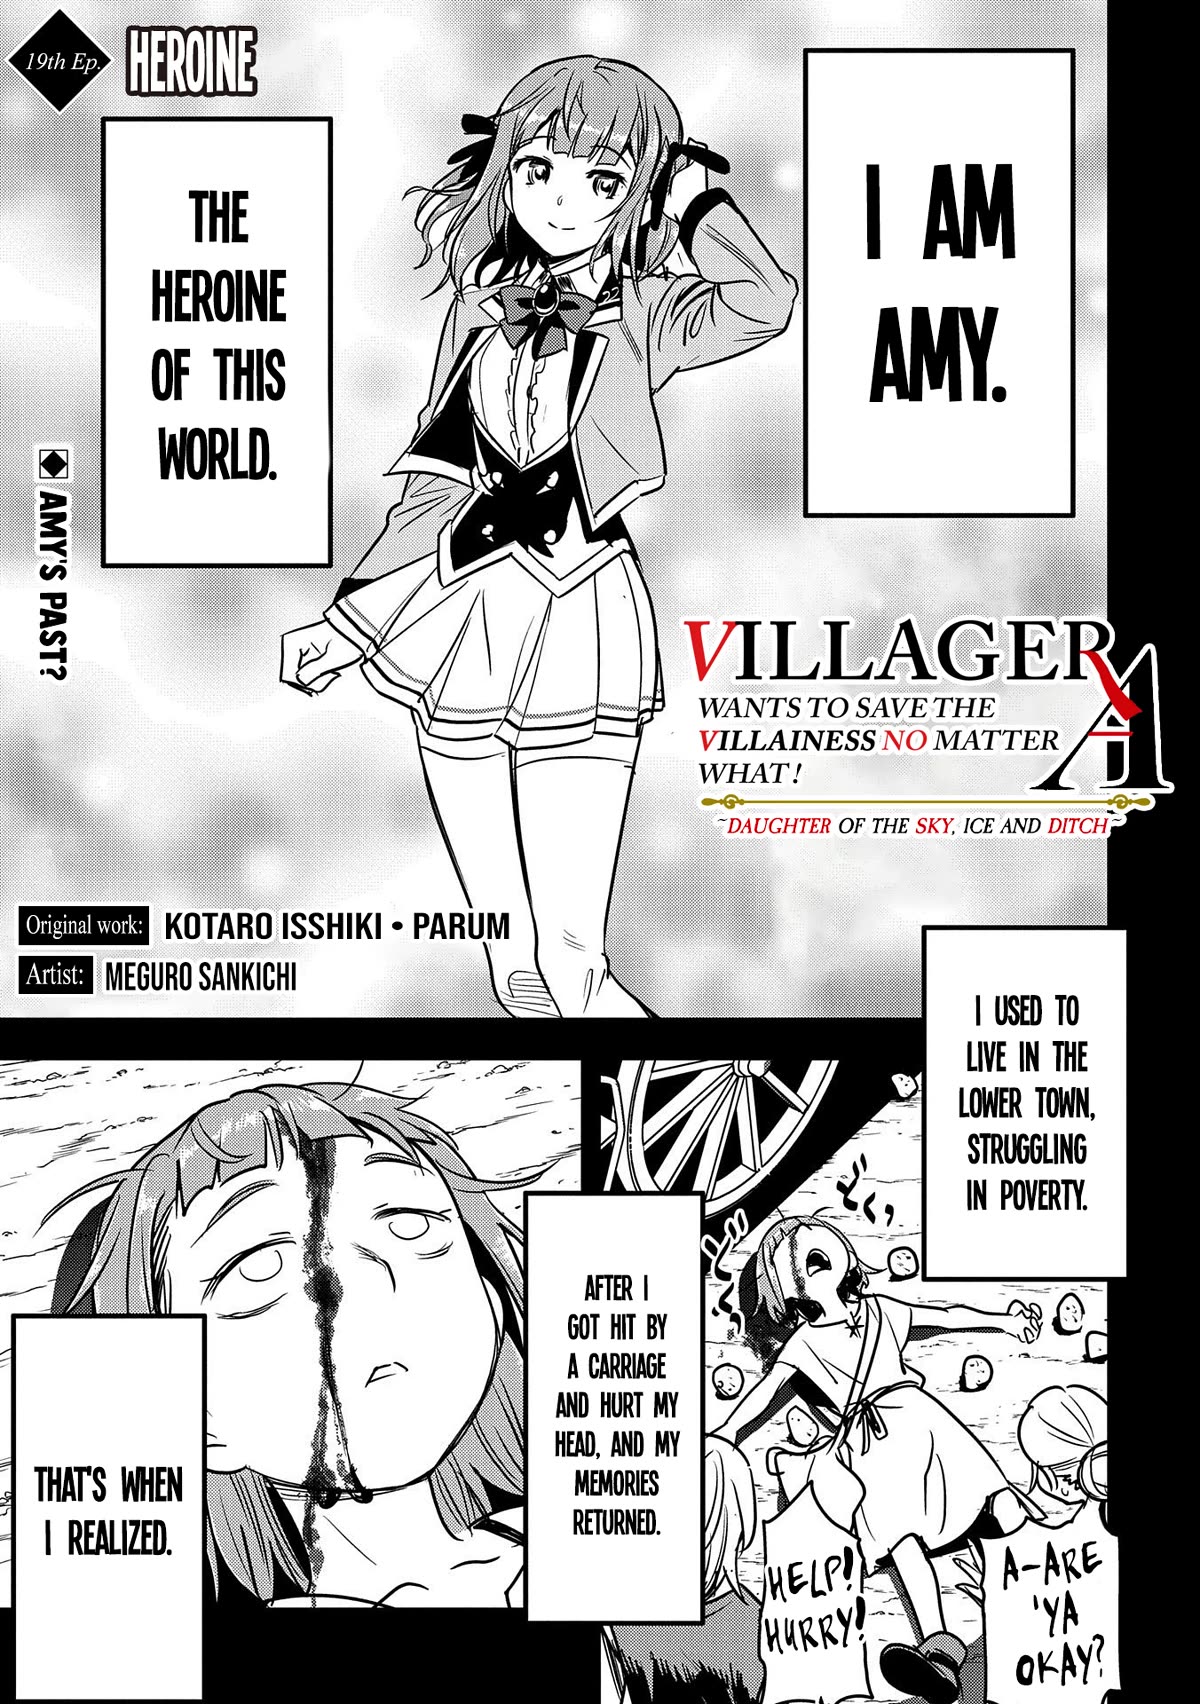 Villager A Wants To Save The Villainess No Matter What! - Page 2